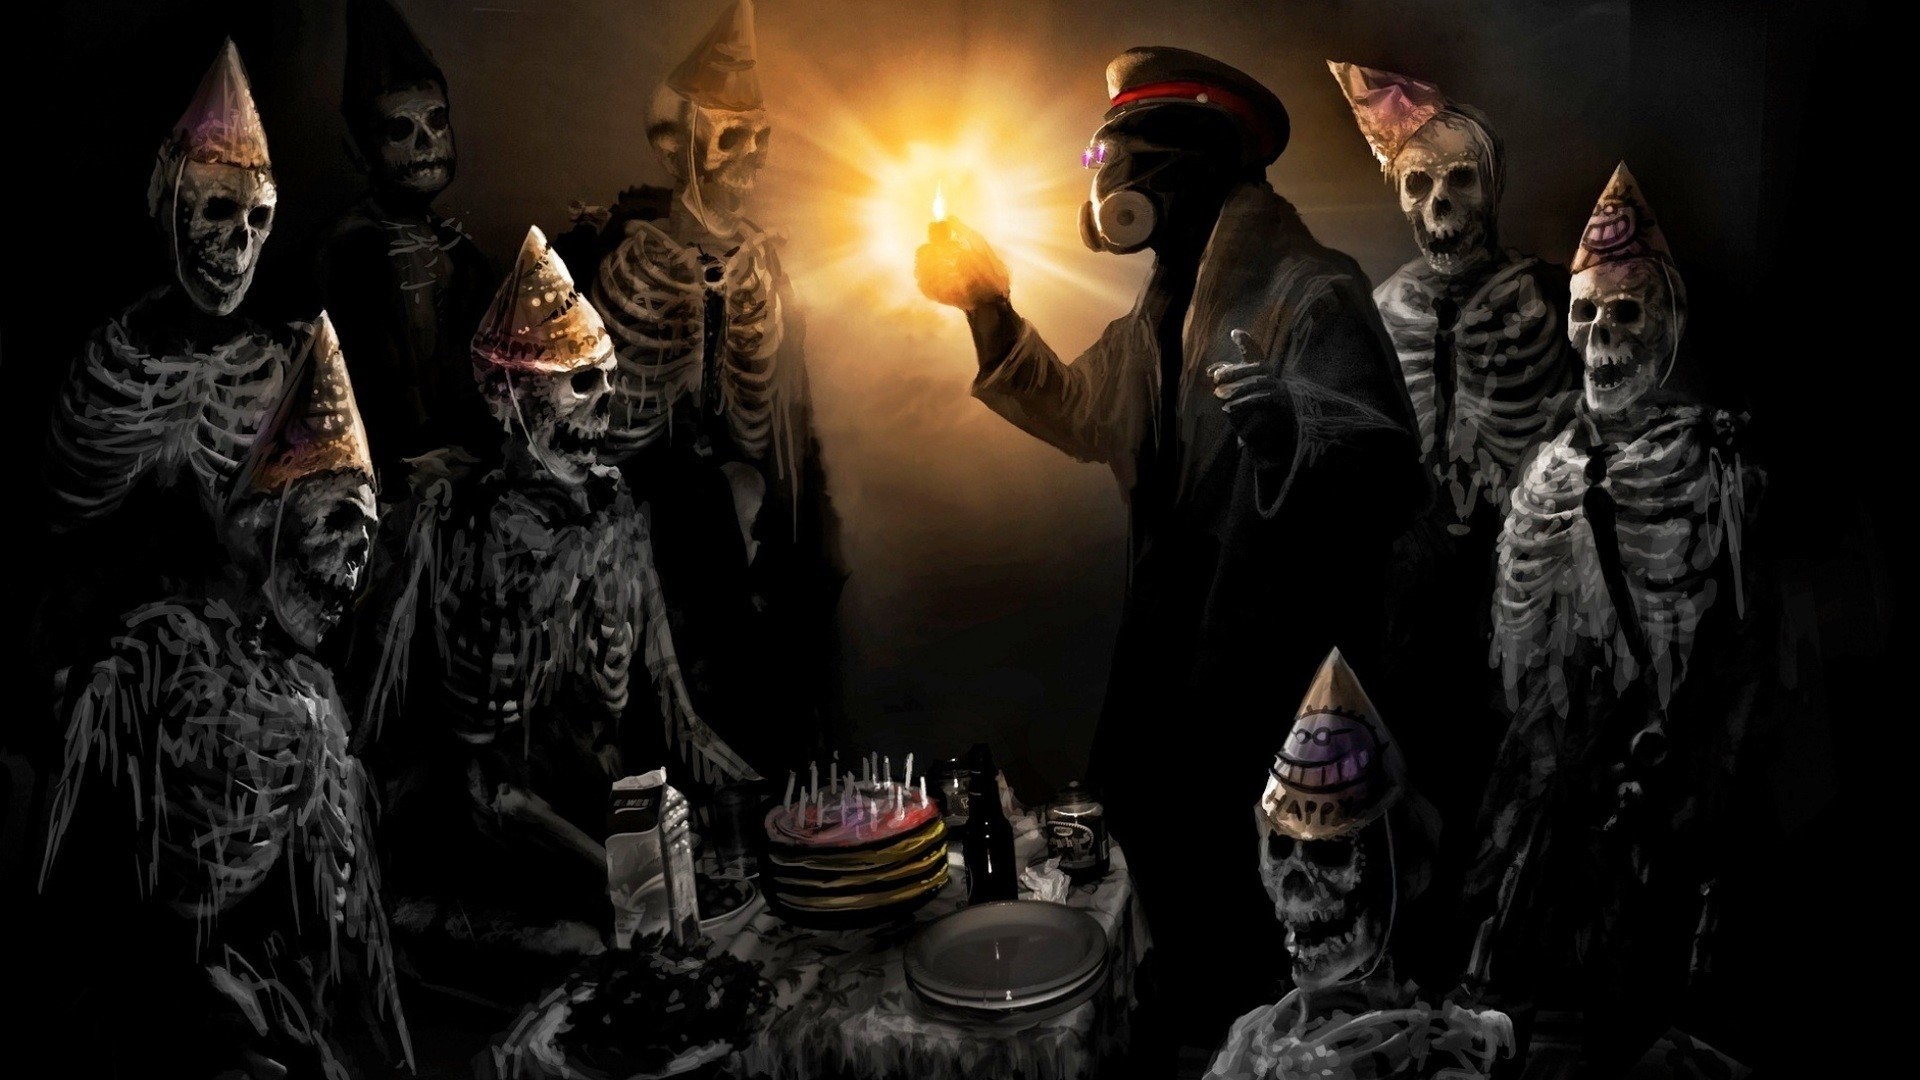 1920x1080 Birthdays Cakes Candles Dead Gas Masks Romantically Apocalyptic Scary  Skeletons Vitaly S Alexius War Zee Captein